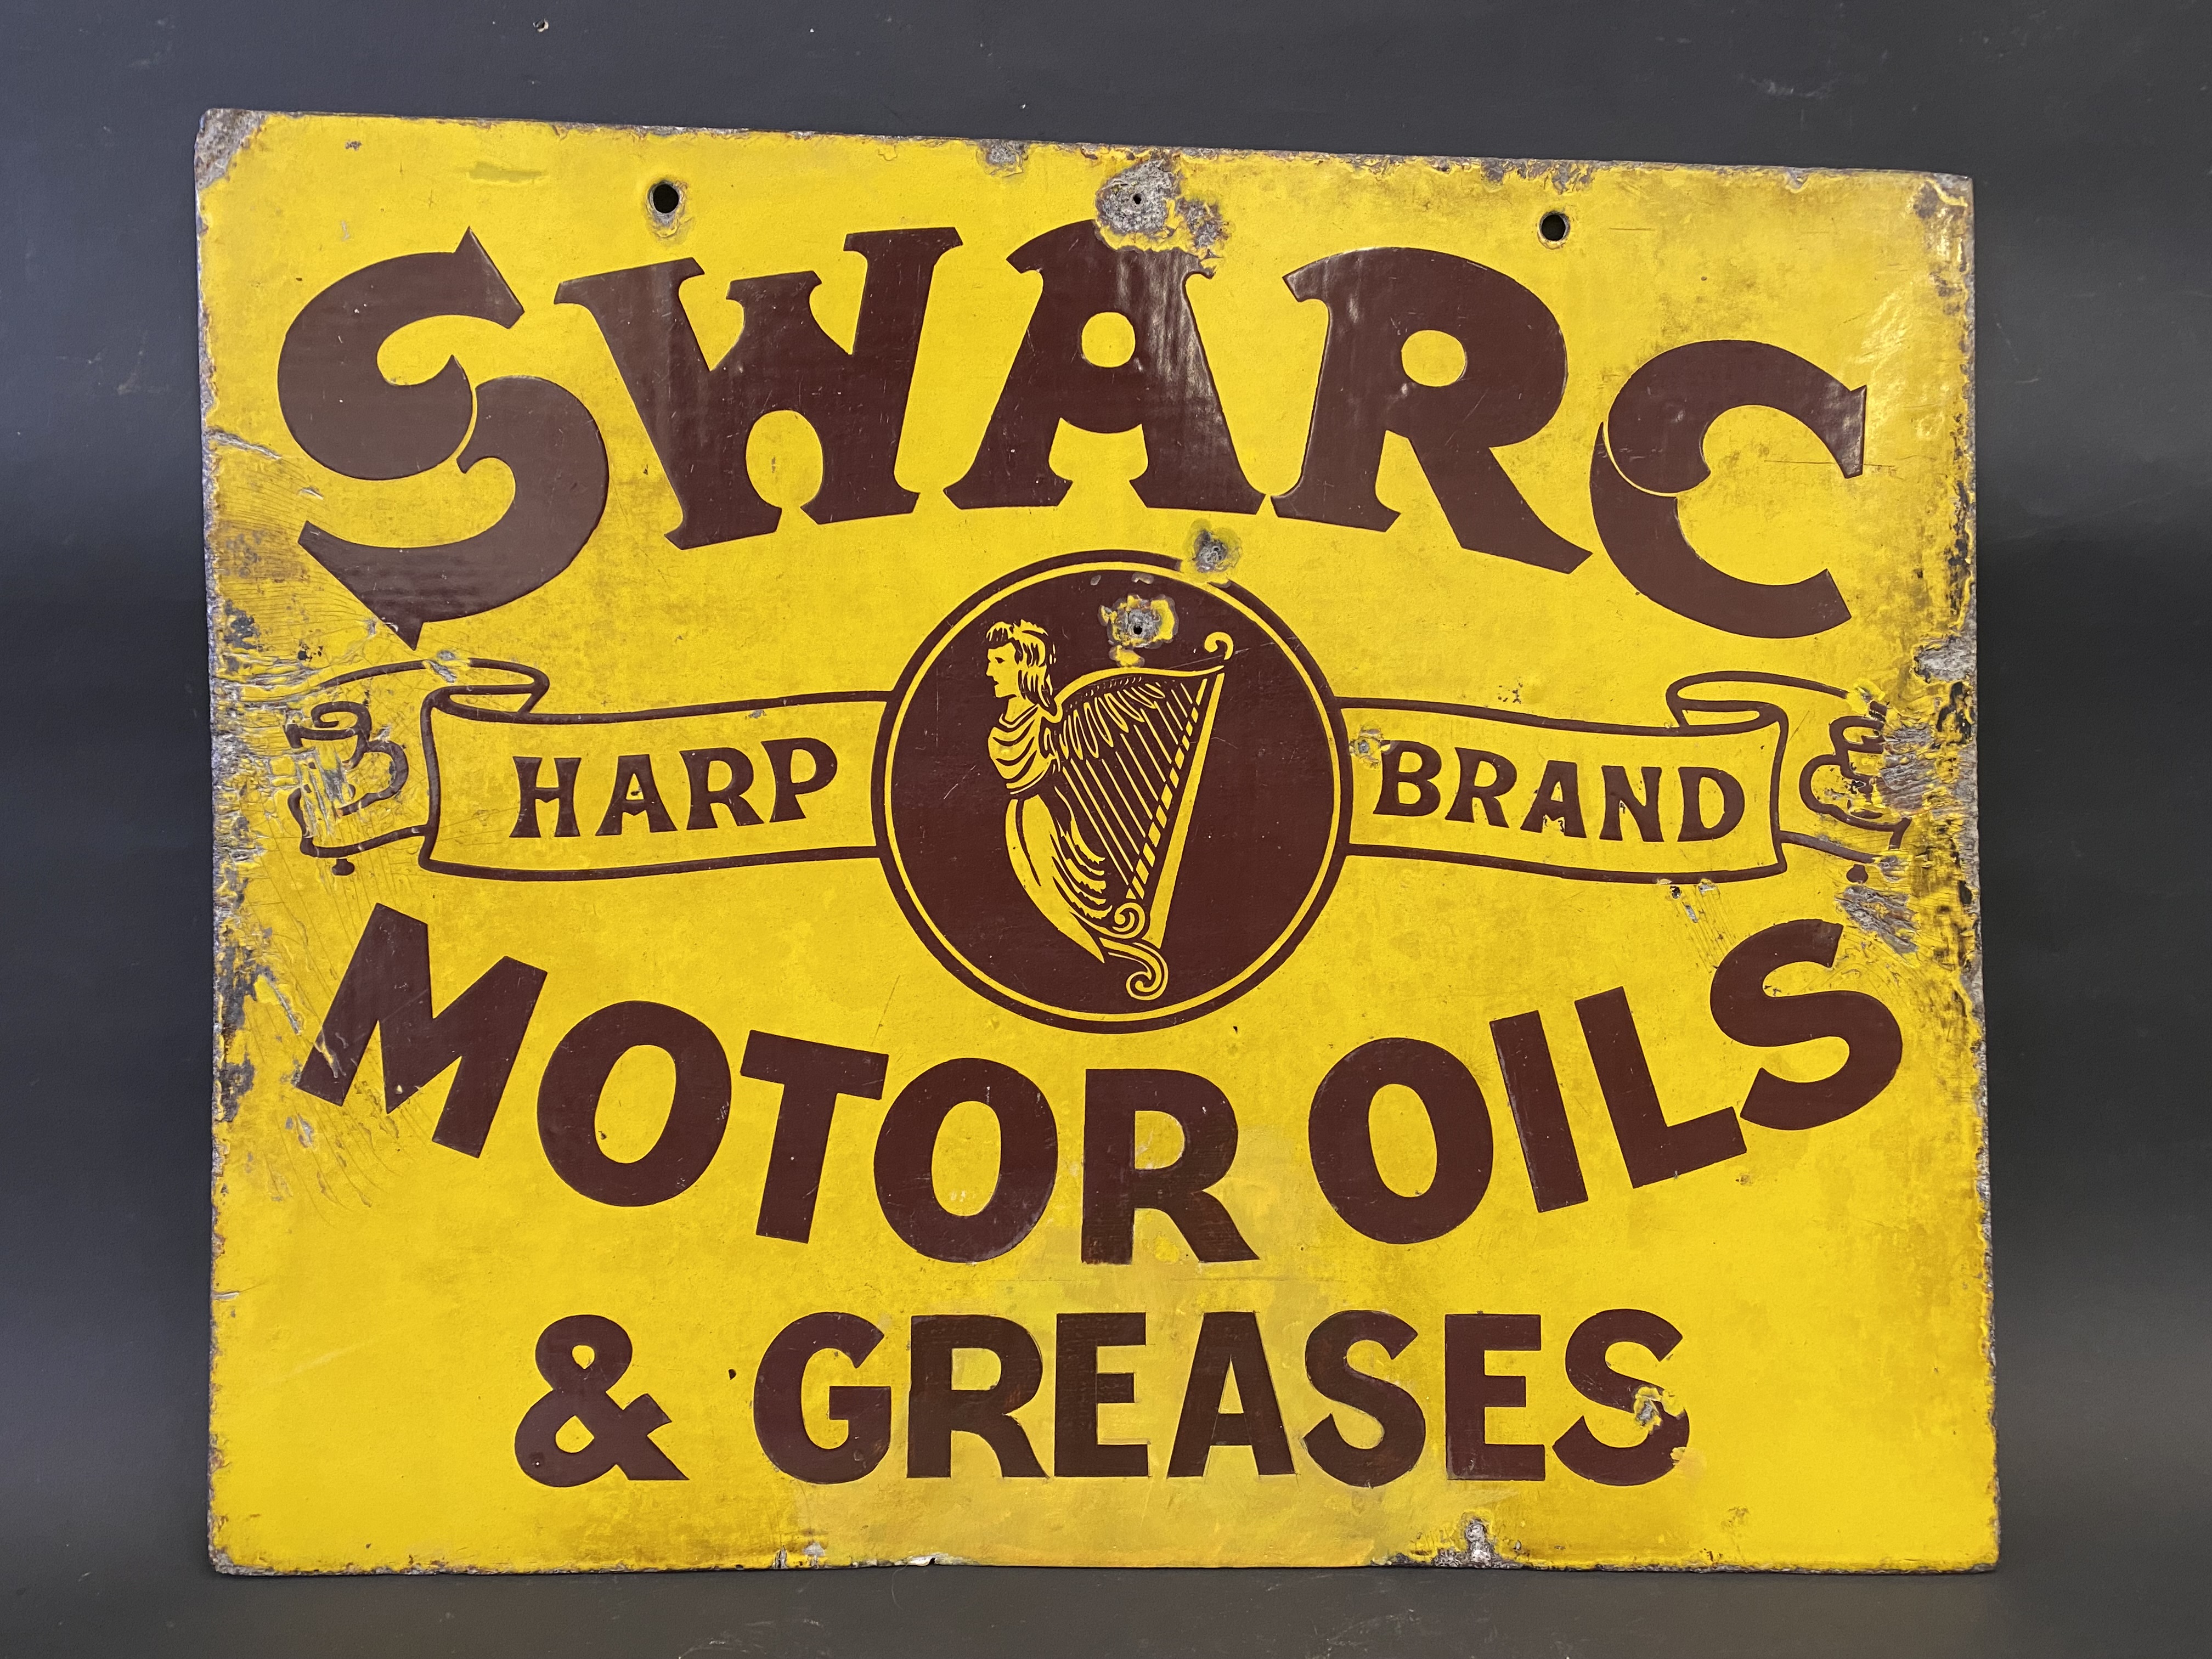 A rare SWARC Motor Oils & Greases double sided enamel sign in good condition, some minor